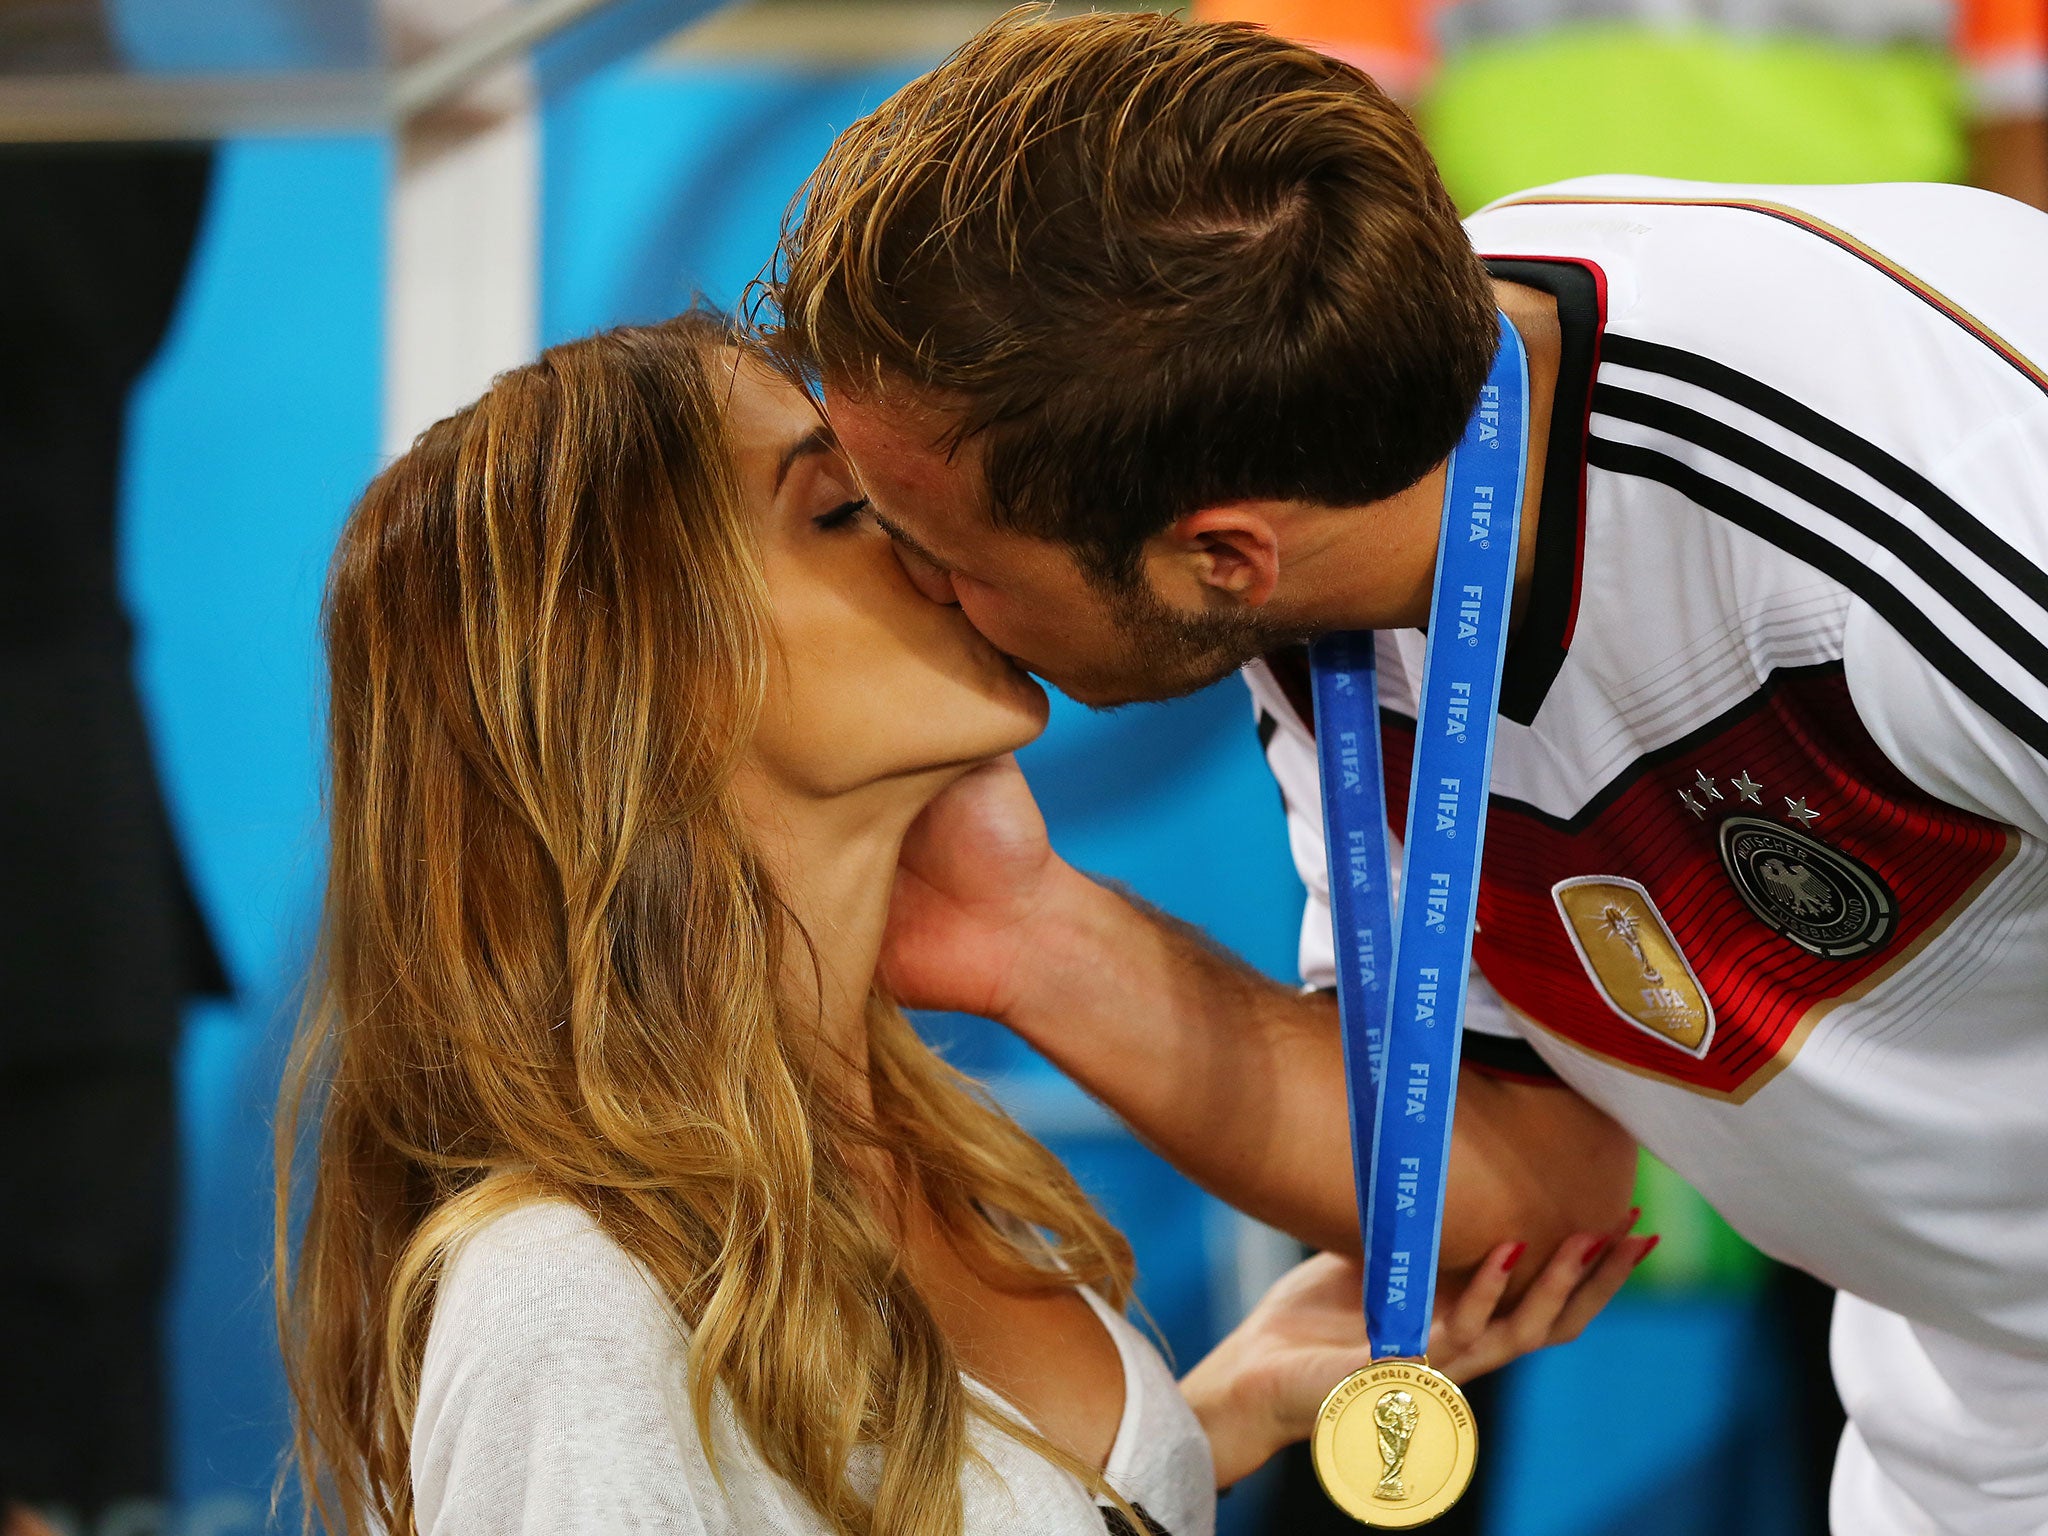 Mario Goetze of Germany kisses girlfriend Ann-Kathrin Brommel after defeating Argentina 1-0 in extra time during the 2014 FIFA World Cup Brazil Final